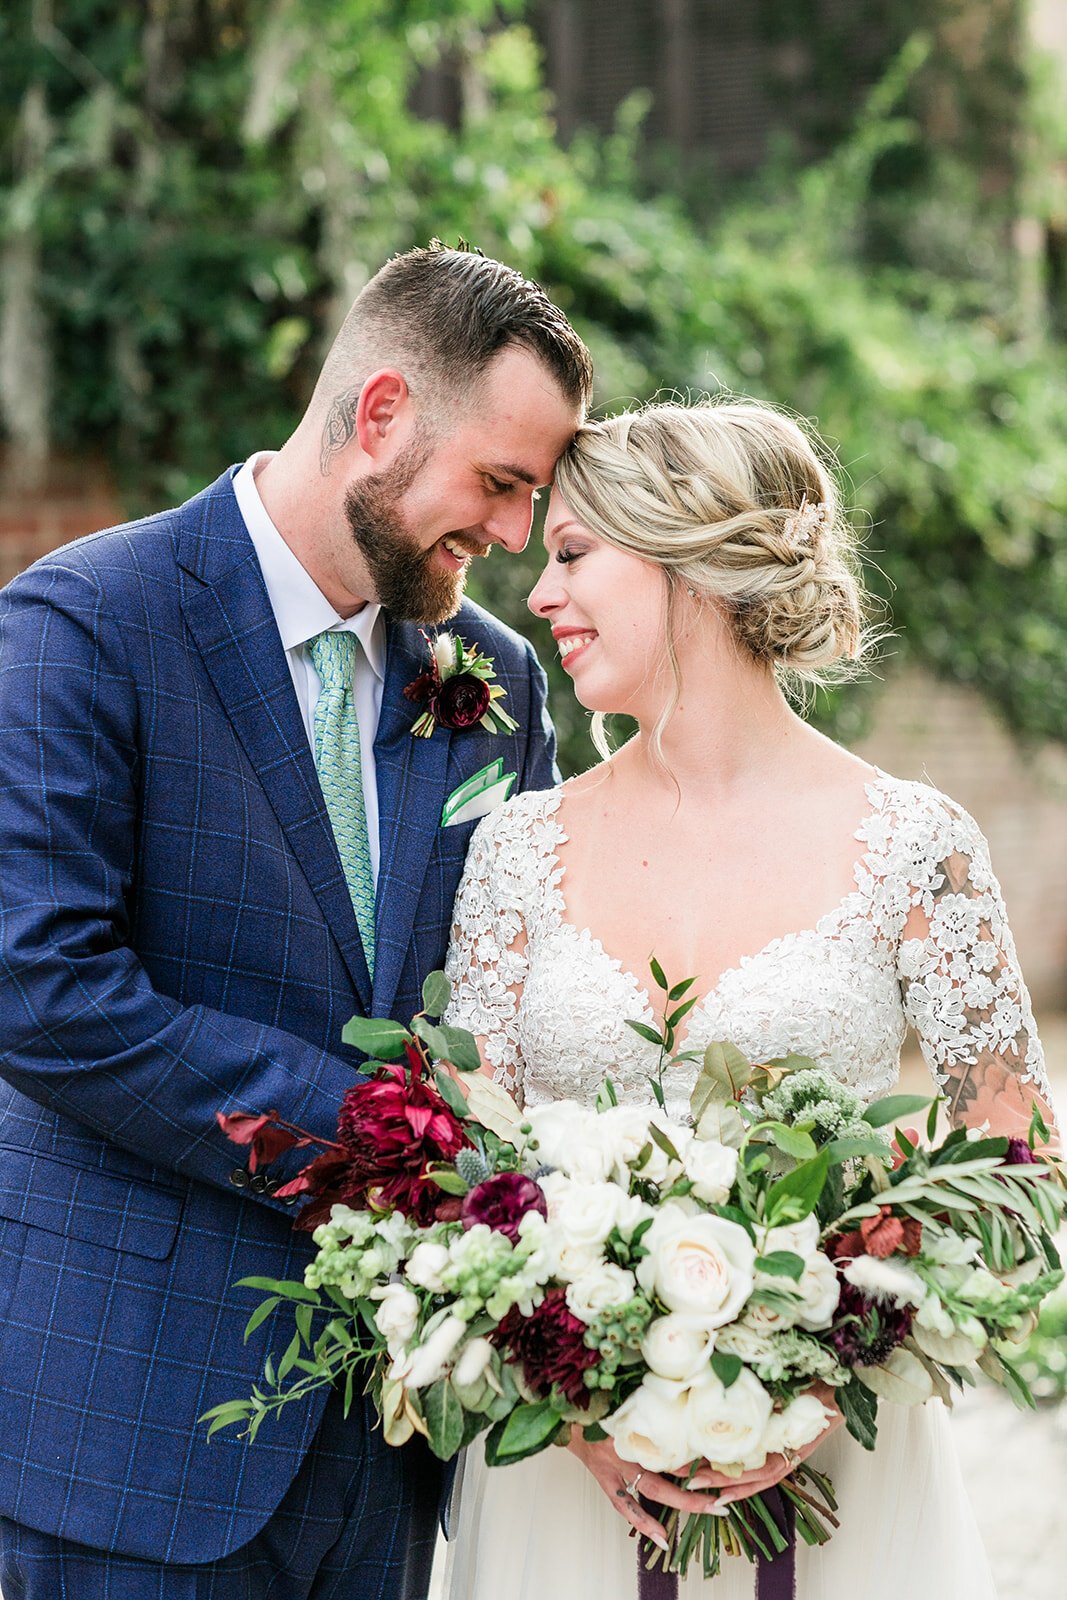 ivory-and-beau-florals-spring-and-stephen-wedding-flowers-wedding-florals-wedding-florist-savannah-florist-savannah-wedding-southern-wedding-floral-design-real-wedding-RLP-B&G12.jpg